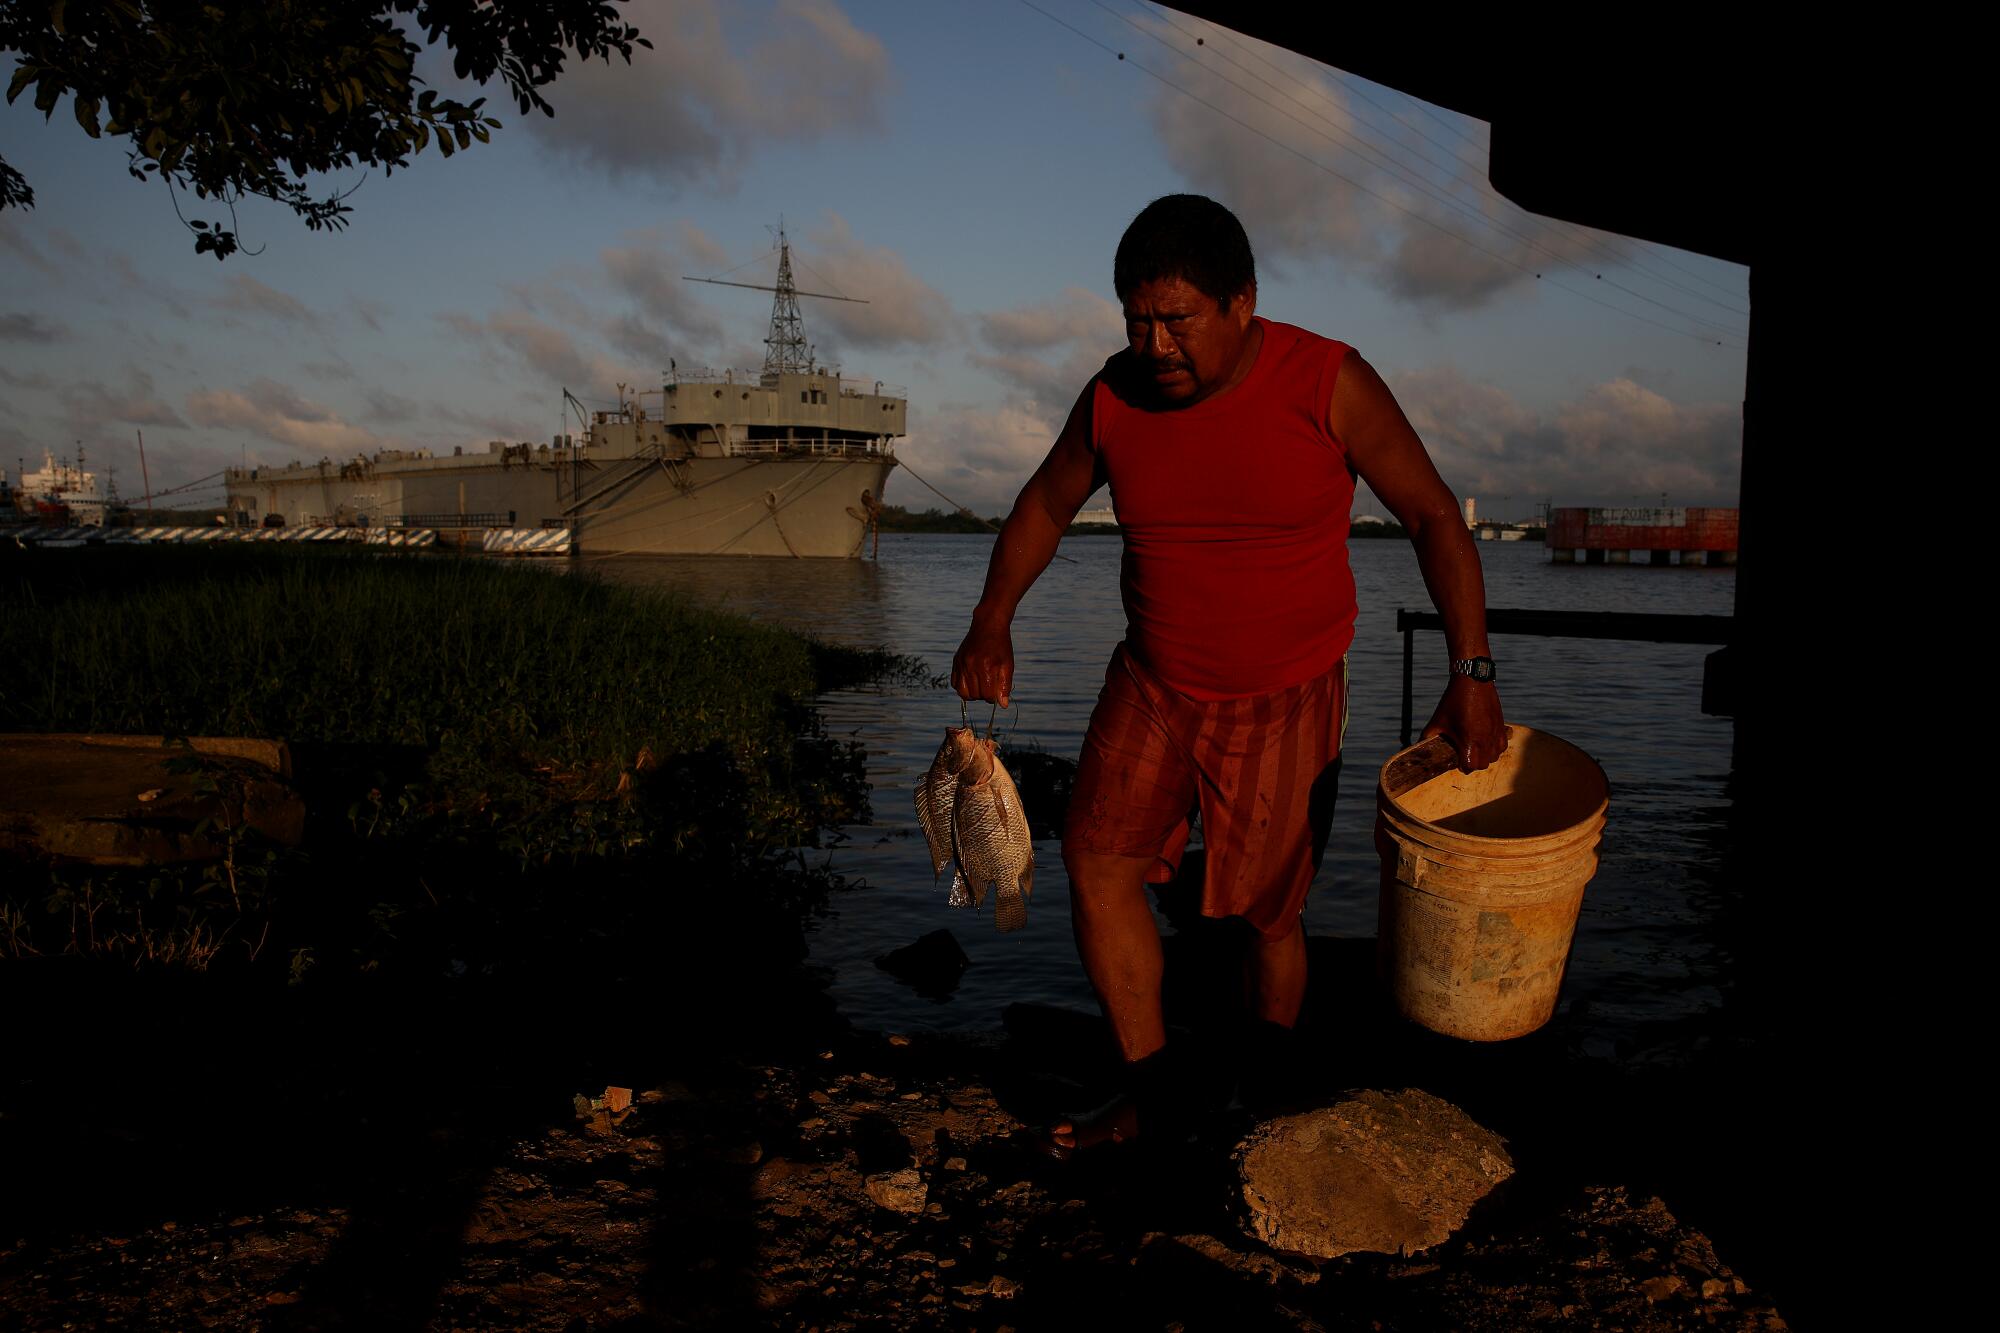 A man carries freshly caught fish near a port.